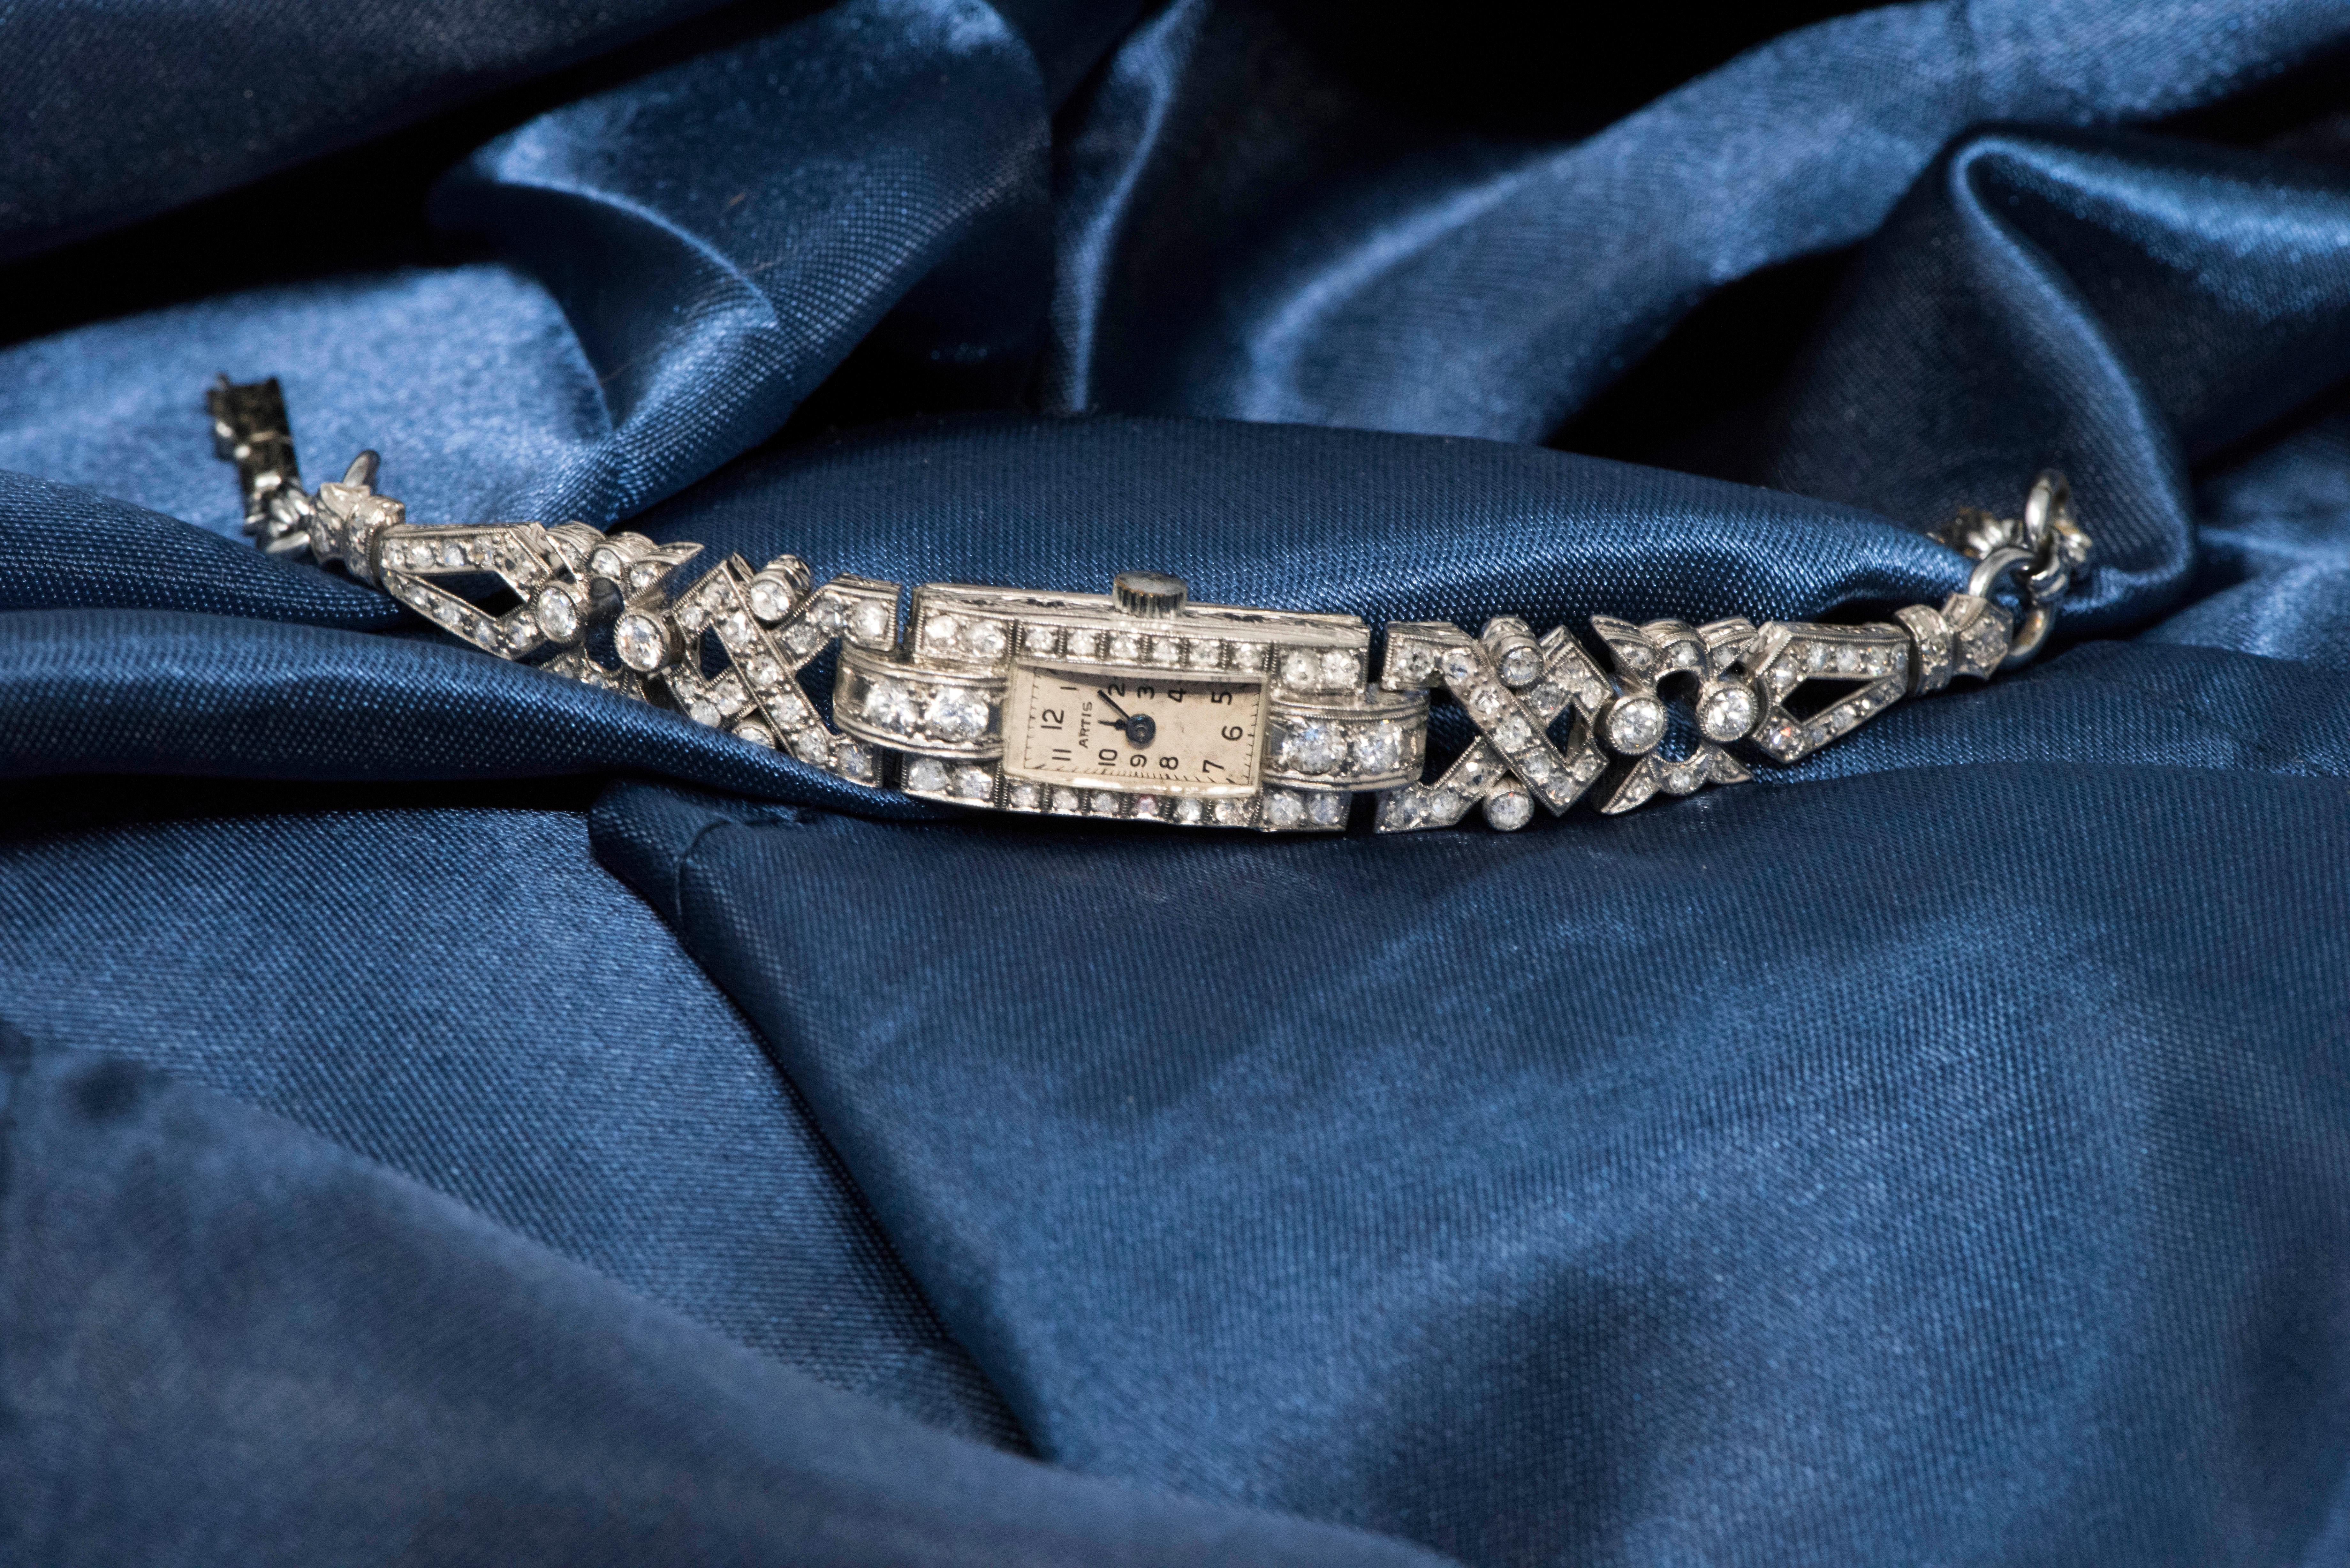 The present Timepiece is an elegant and sophisticated 1920s Art Deco, Platinum Diamond Set Egyptian revival motif Bracelet watch.

The bracelet is designed with an intricately planned Egyptian revival motif concept of interwoven triangular and